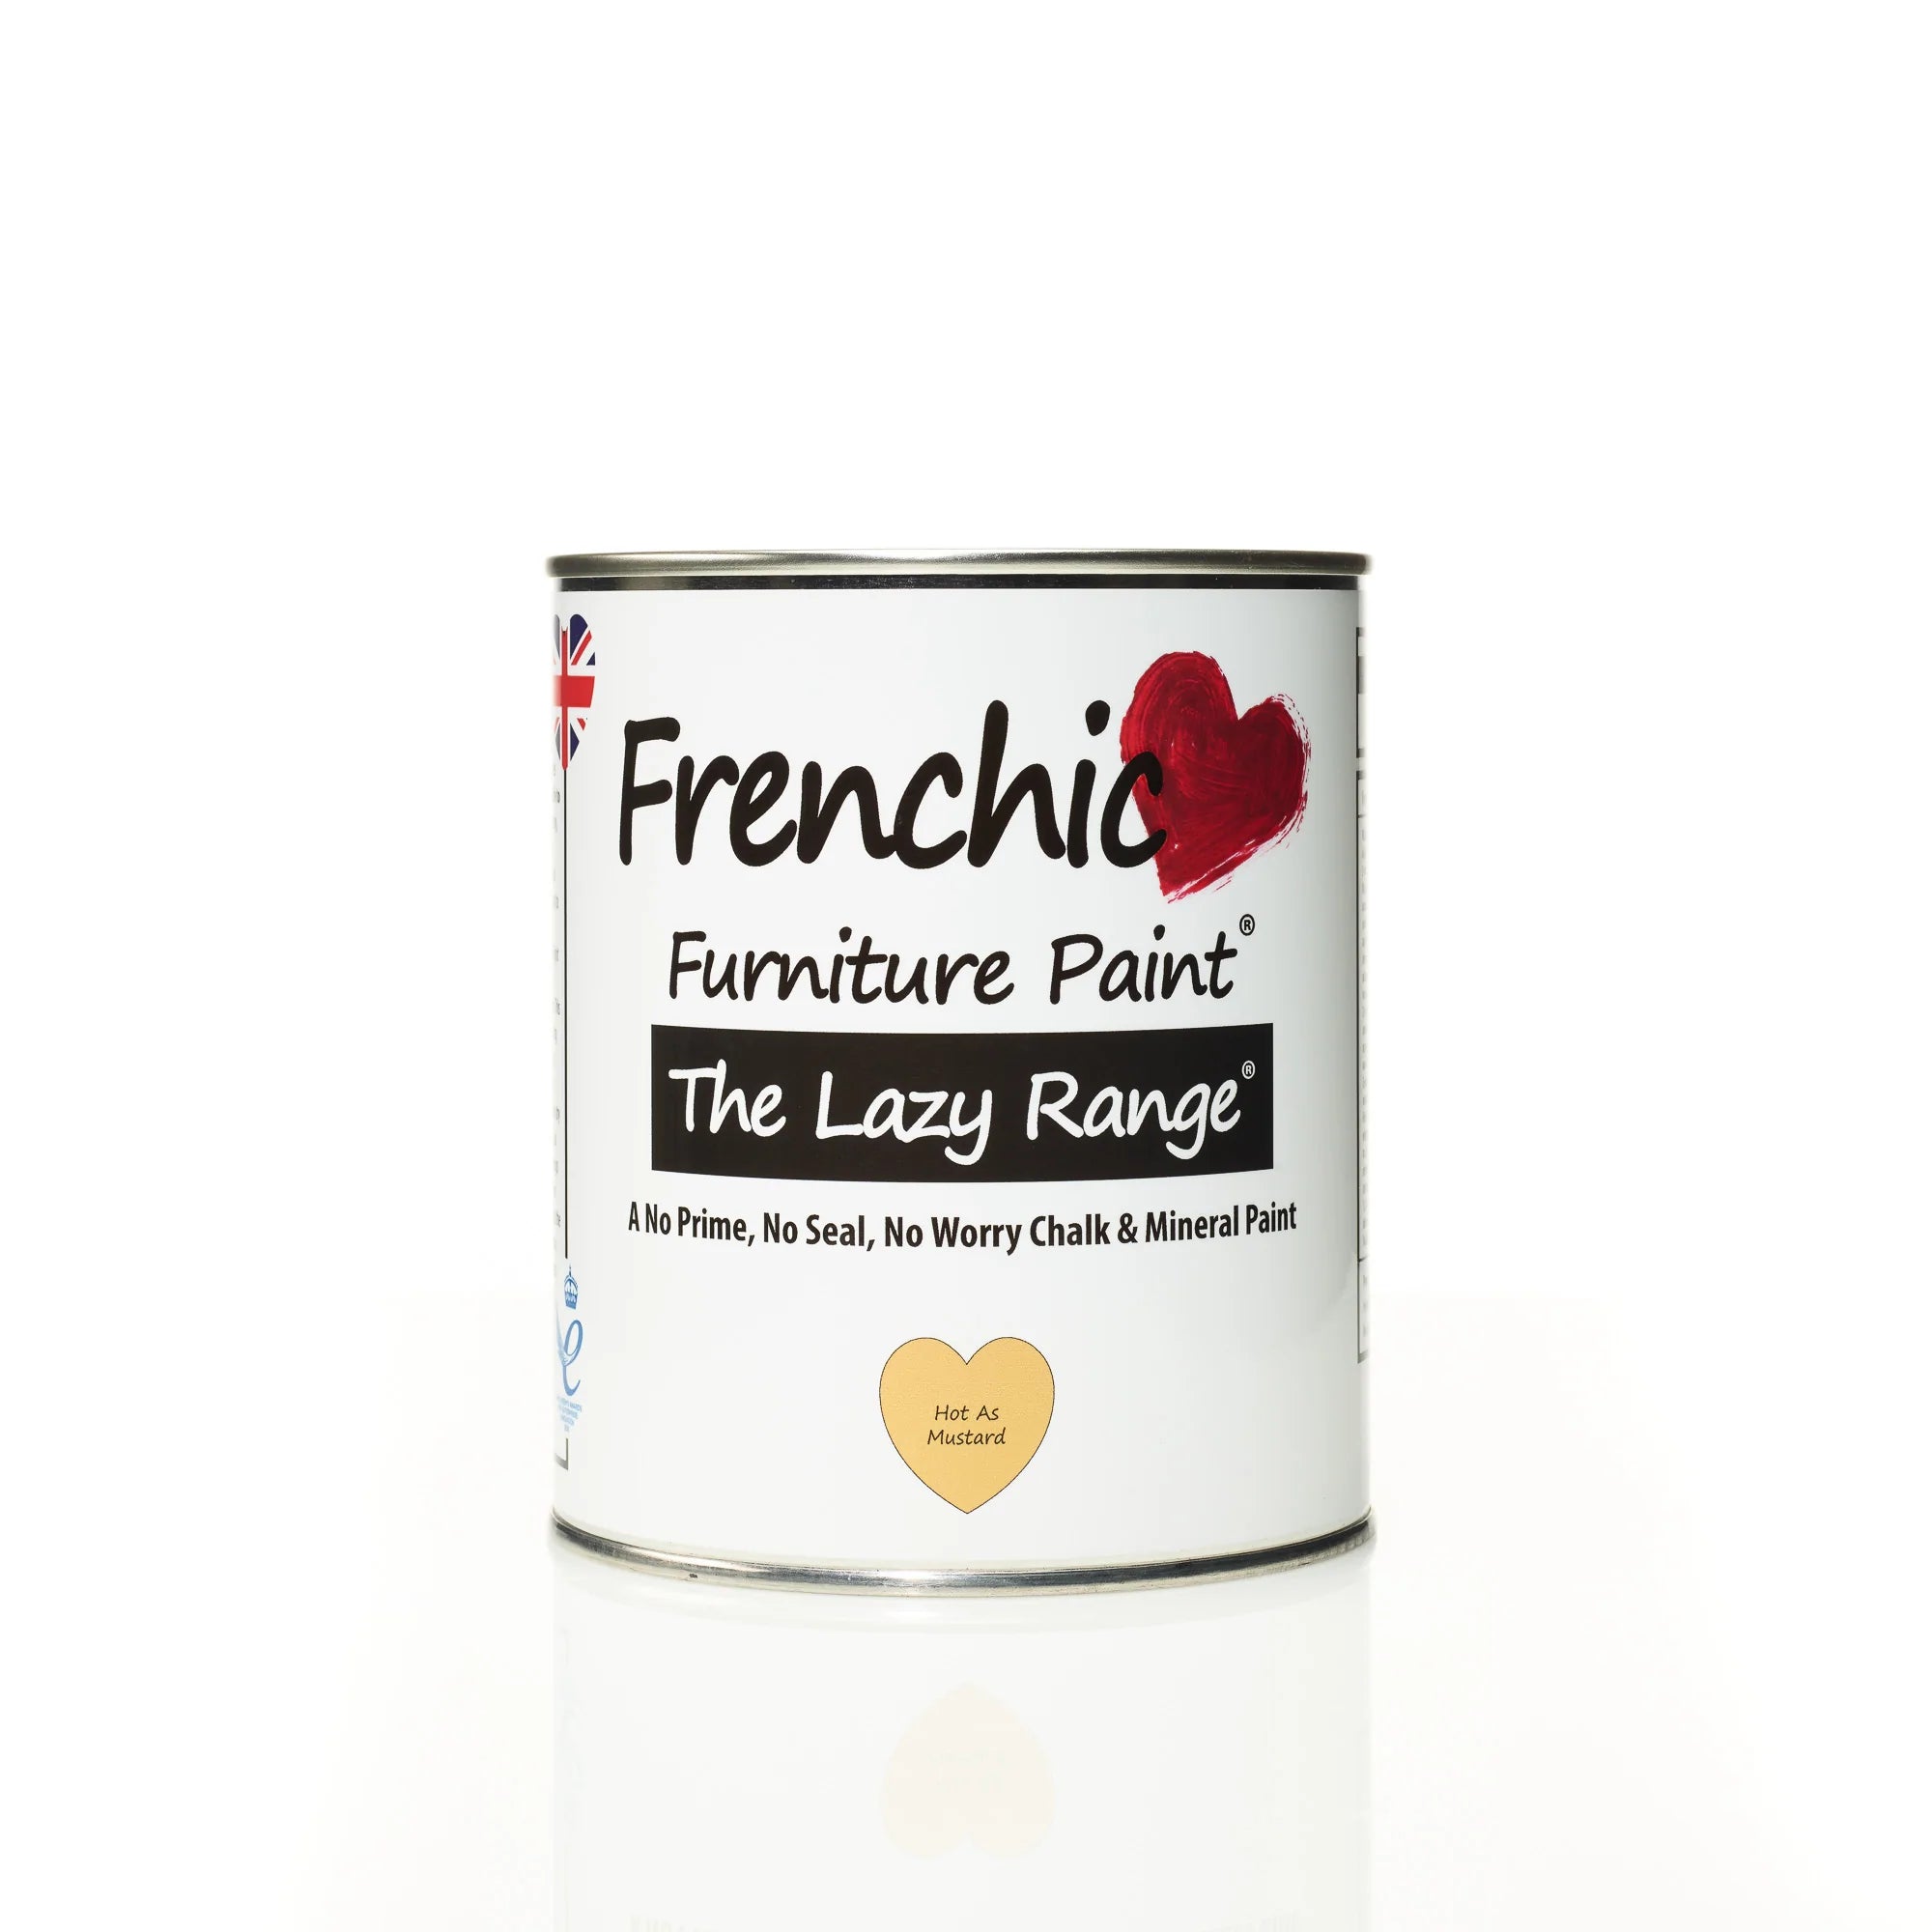 Frenchic Paint | Lazy Range - Hot As Mustard by Weirs of Baggot St